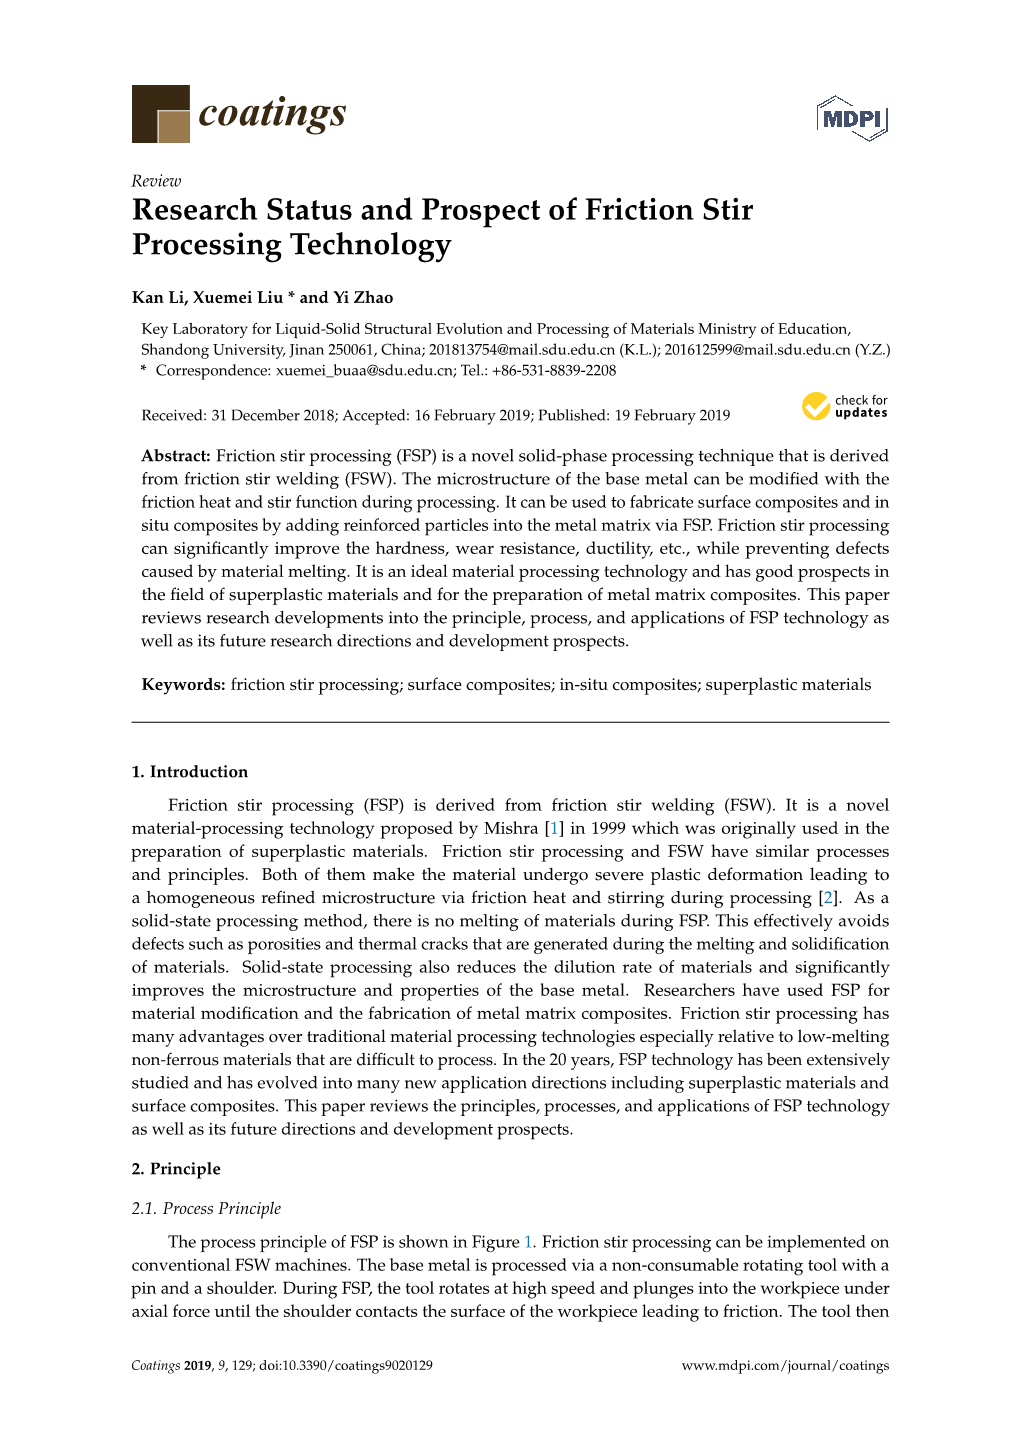 Research Status and Prospect of Friction Stir Processing Technology